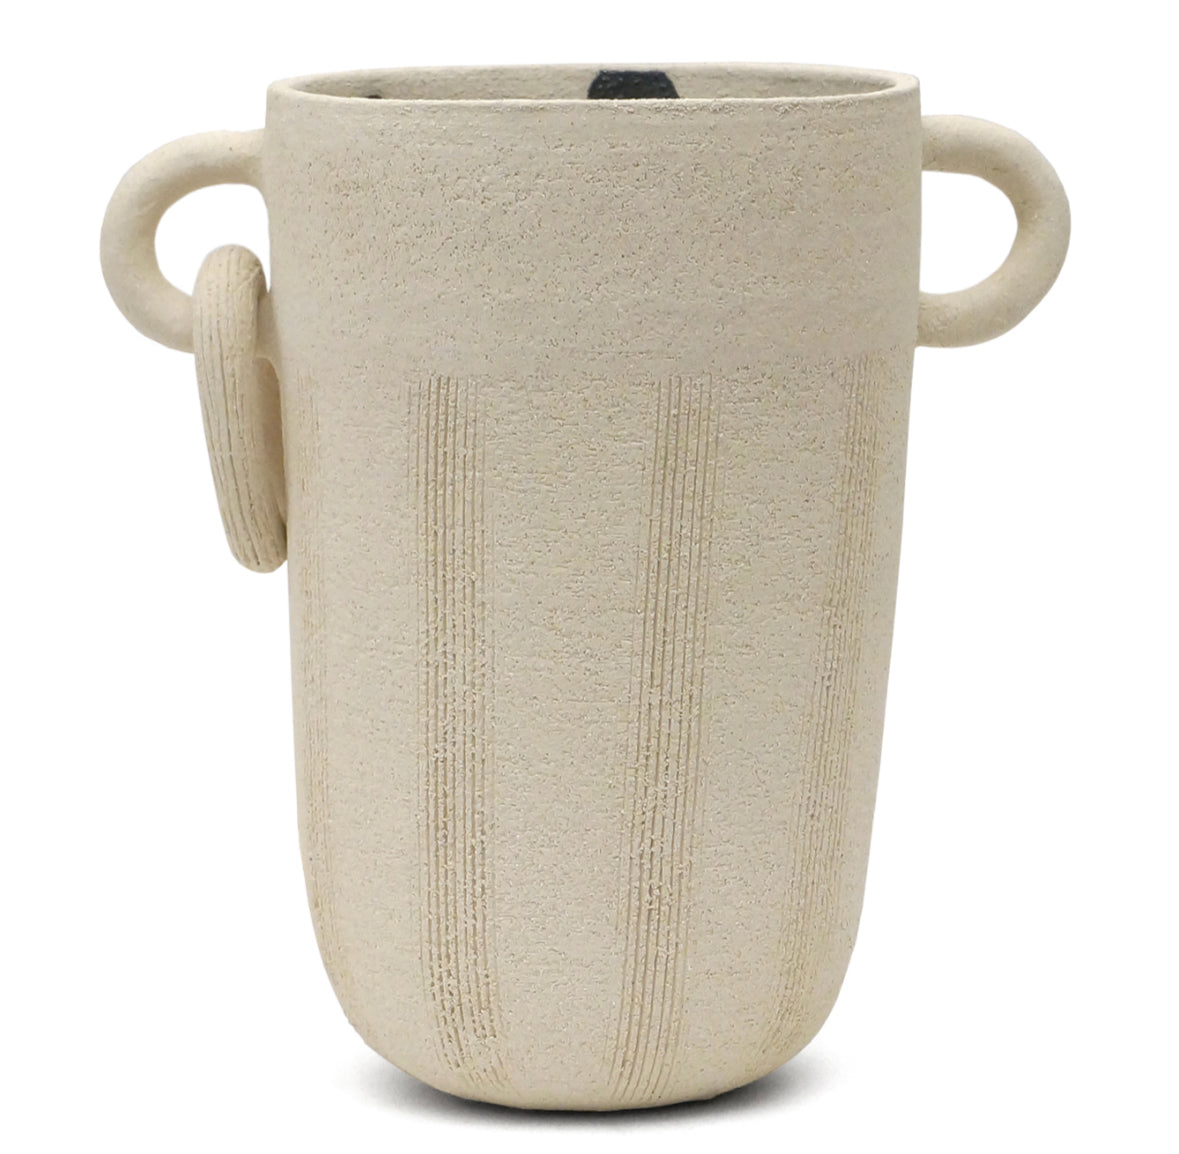 Incised Stoneware Vase with Handles